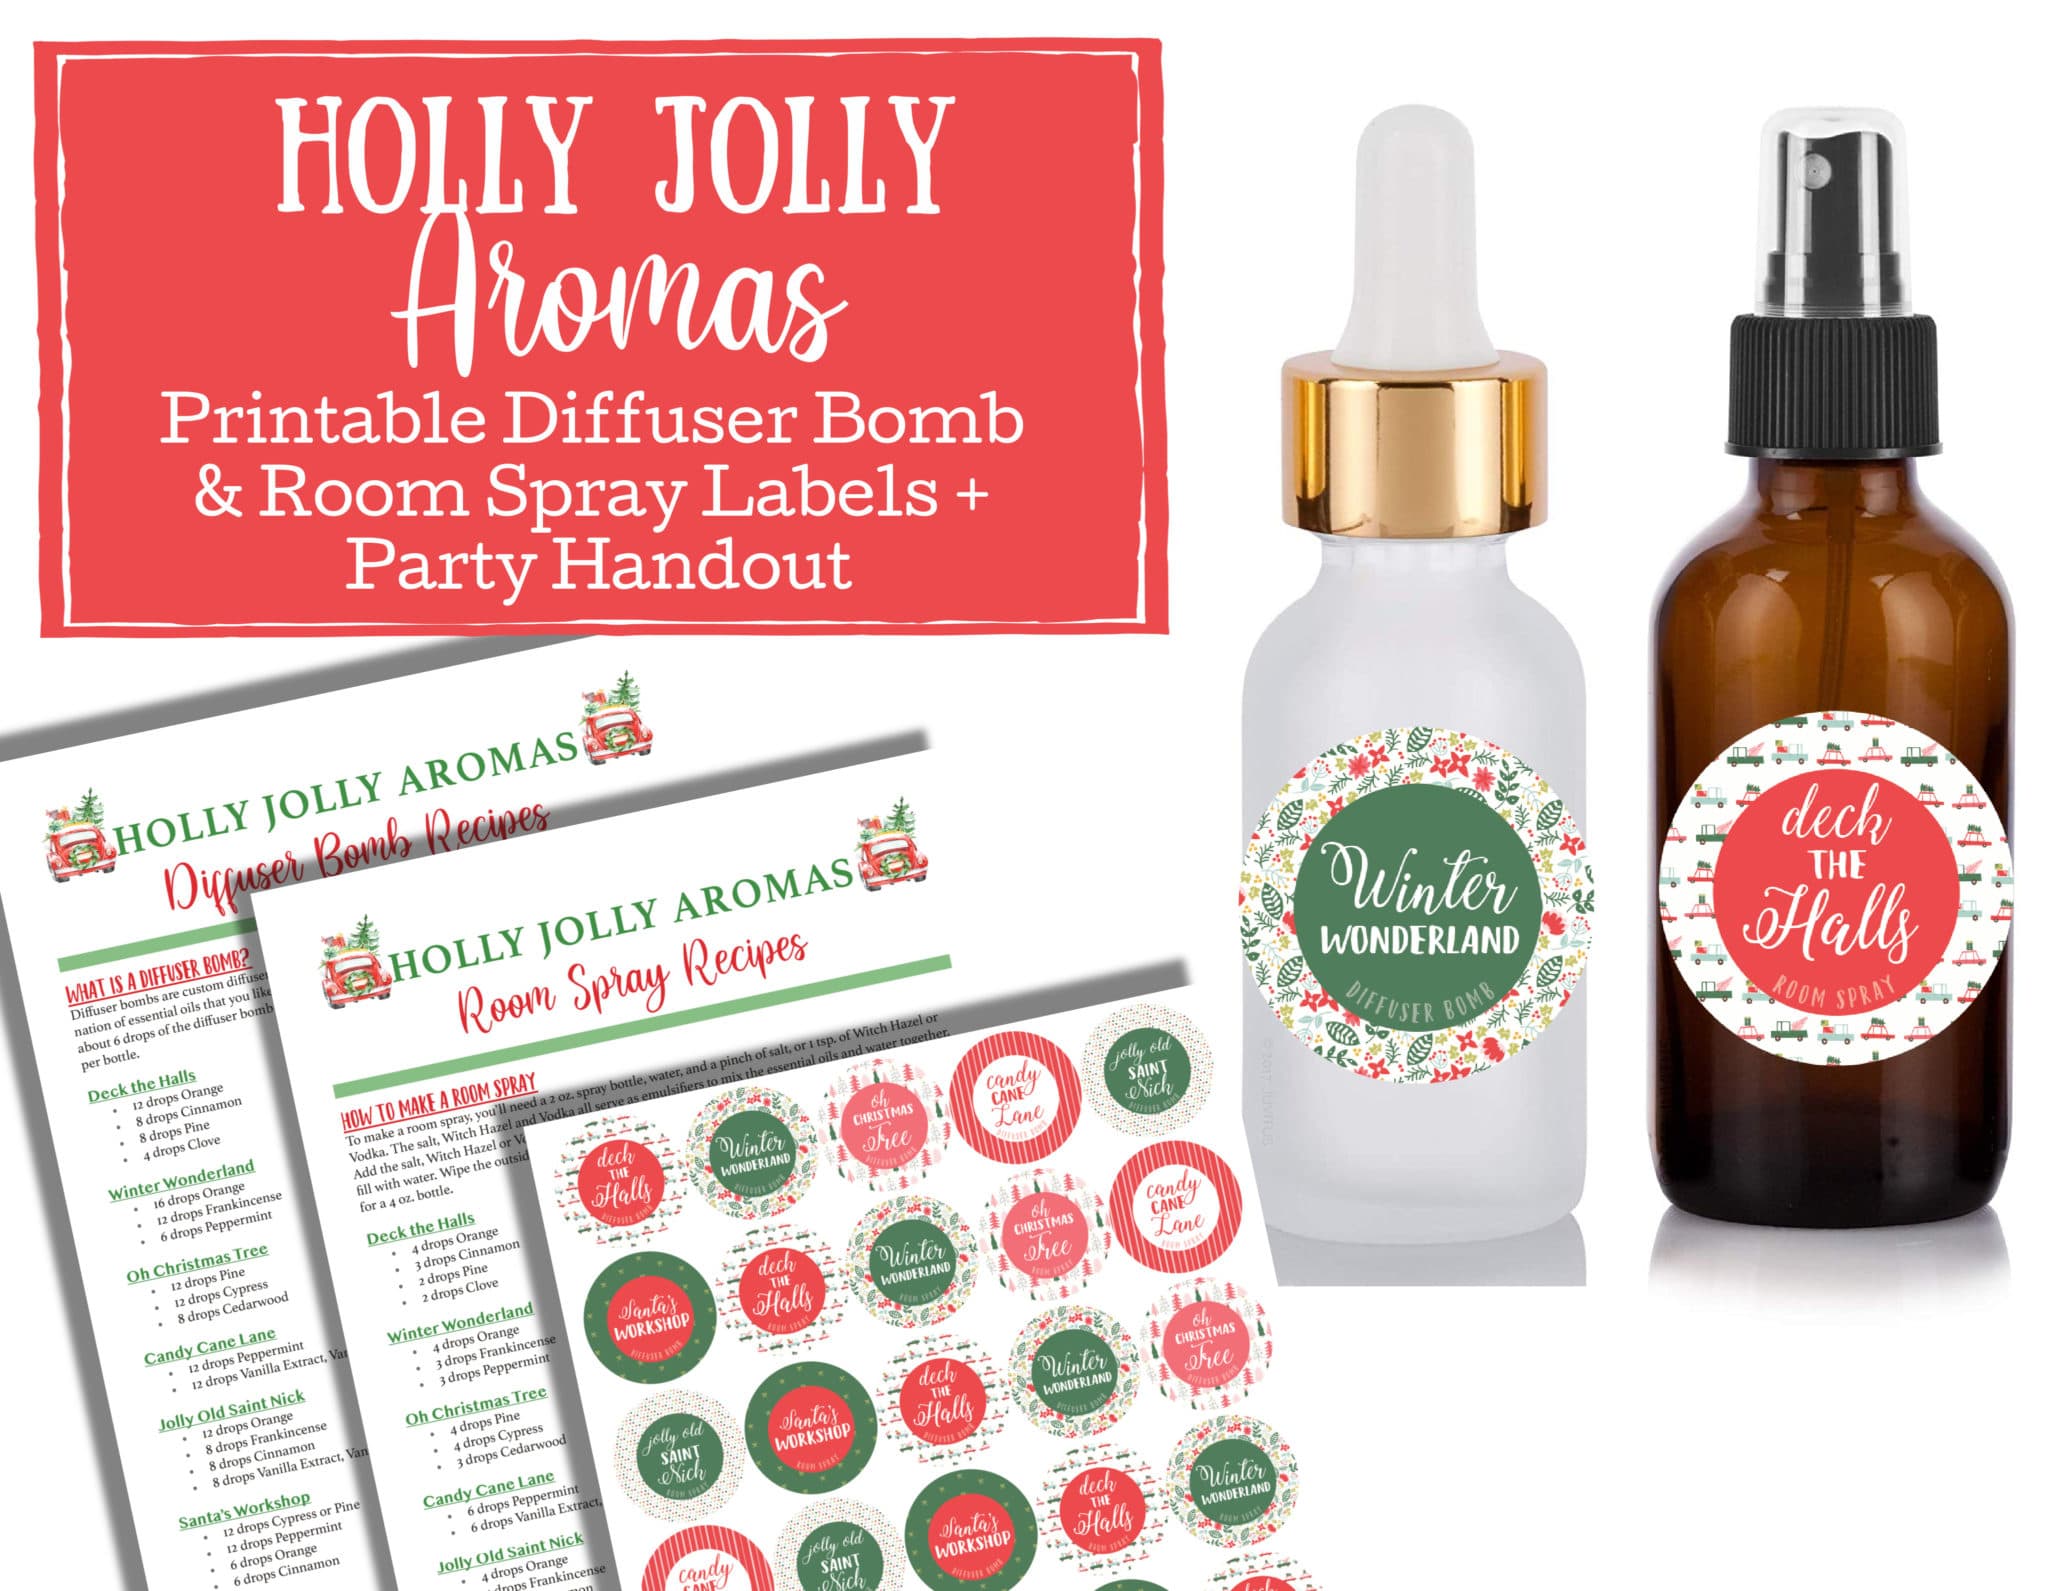 Holiday Diffuser Bomb Recipes and Room Spray Labels on Etsy plus Class Handout